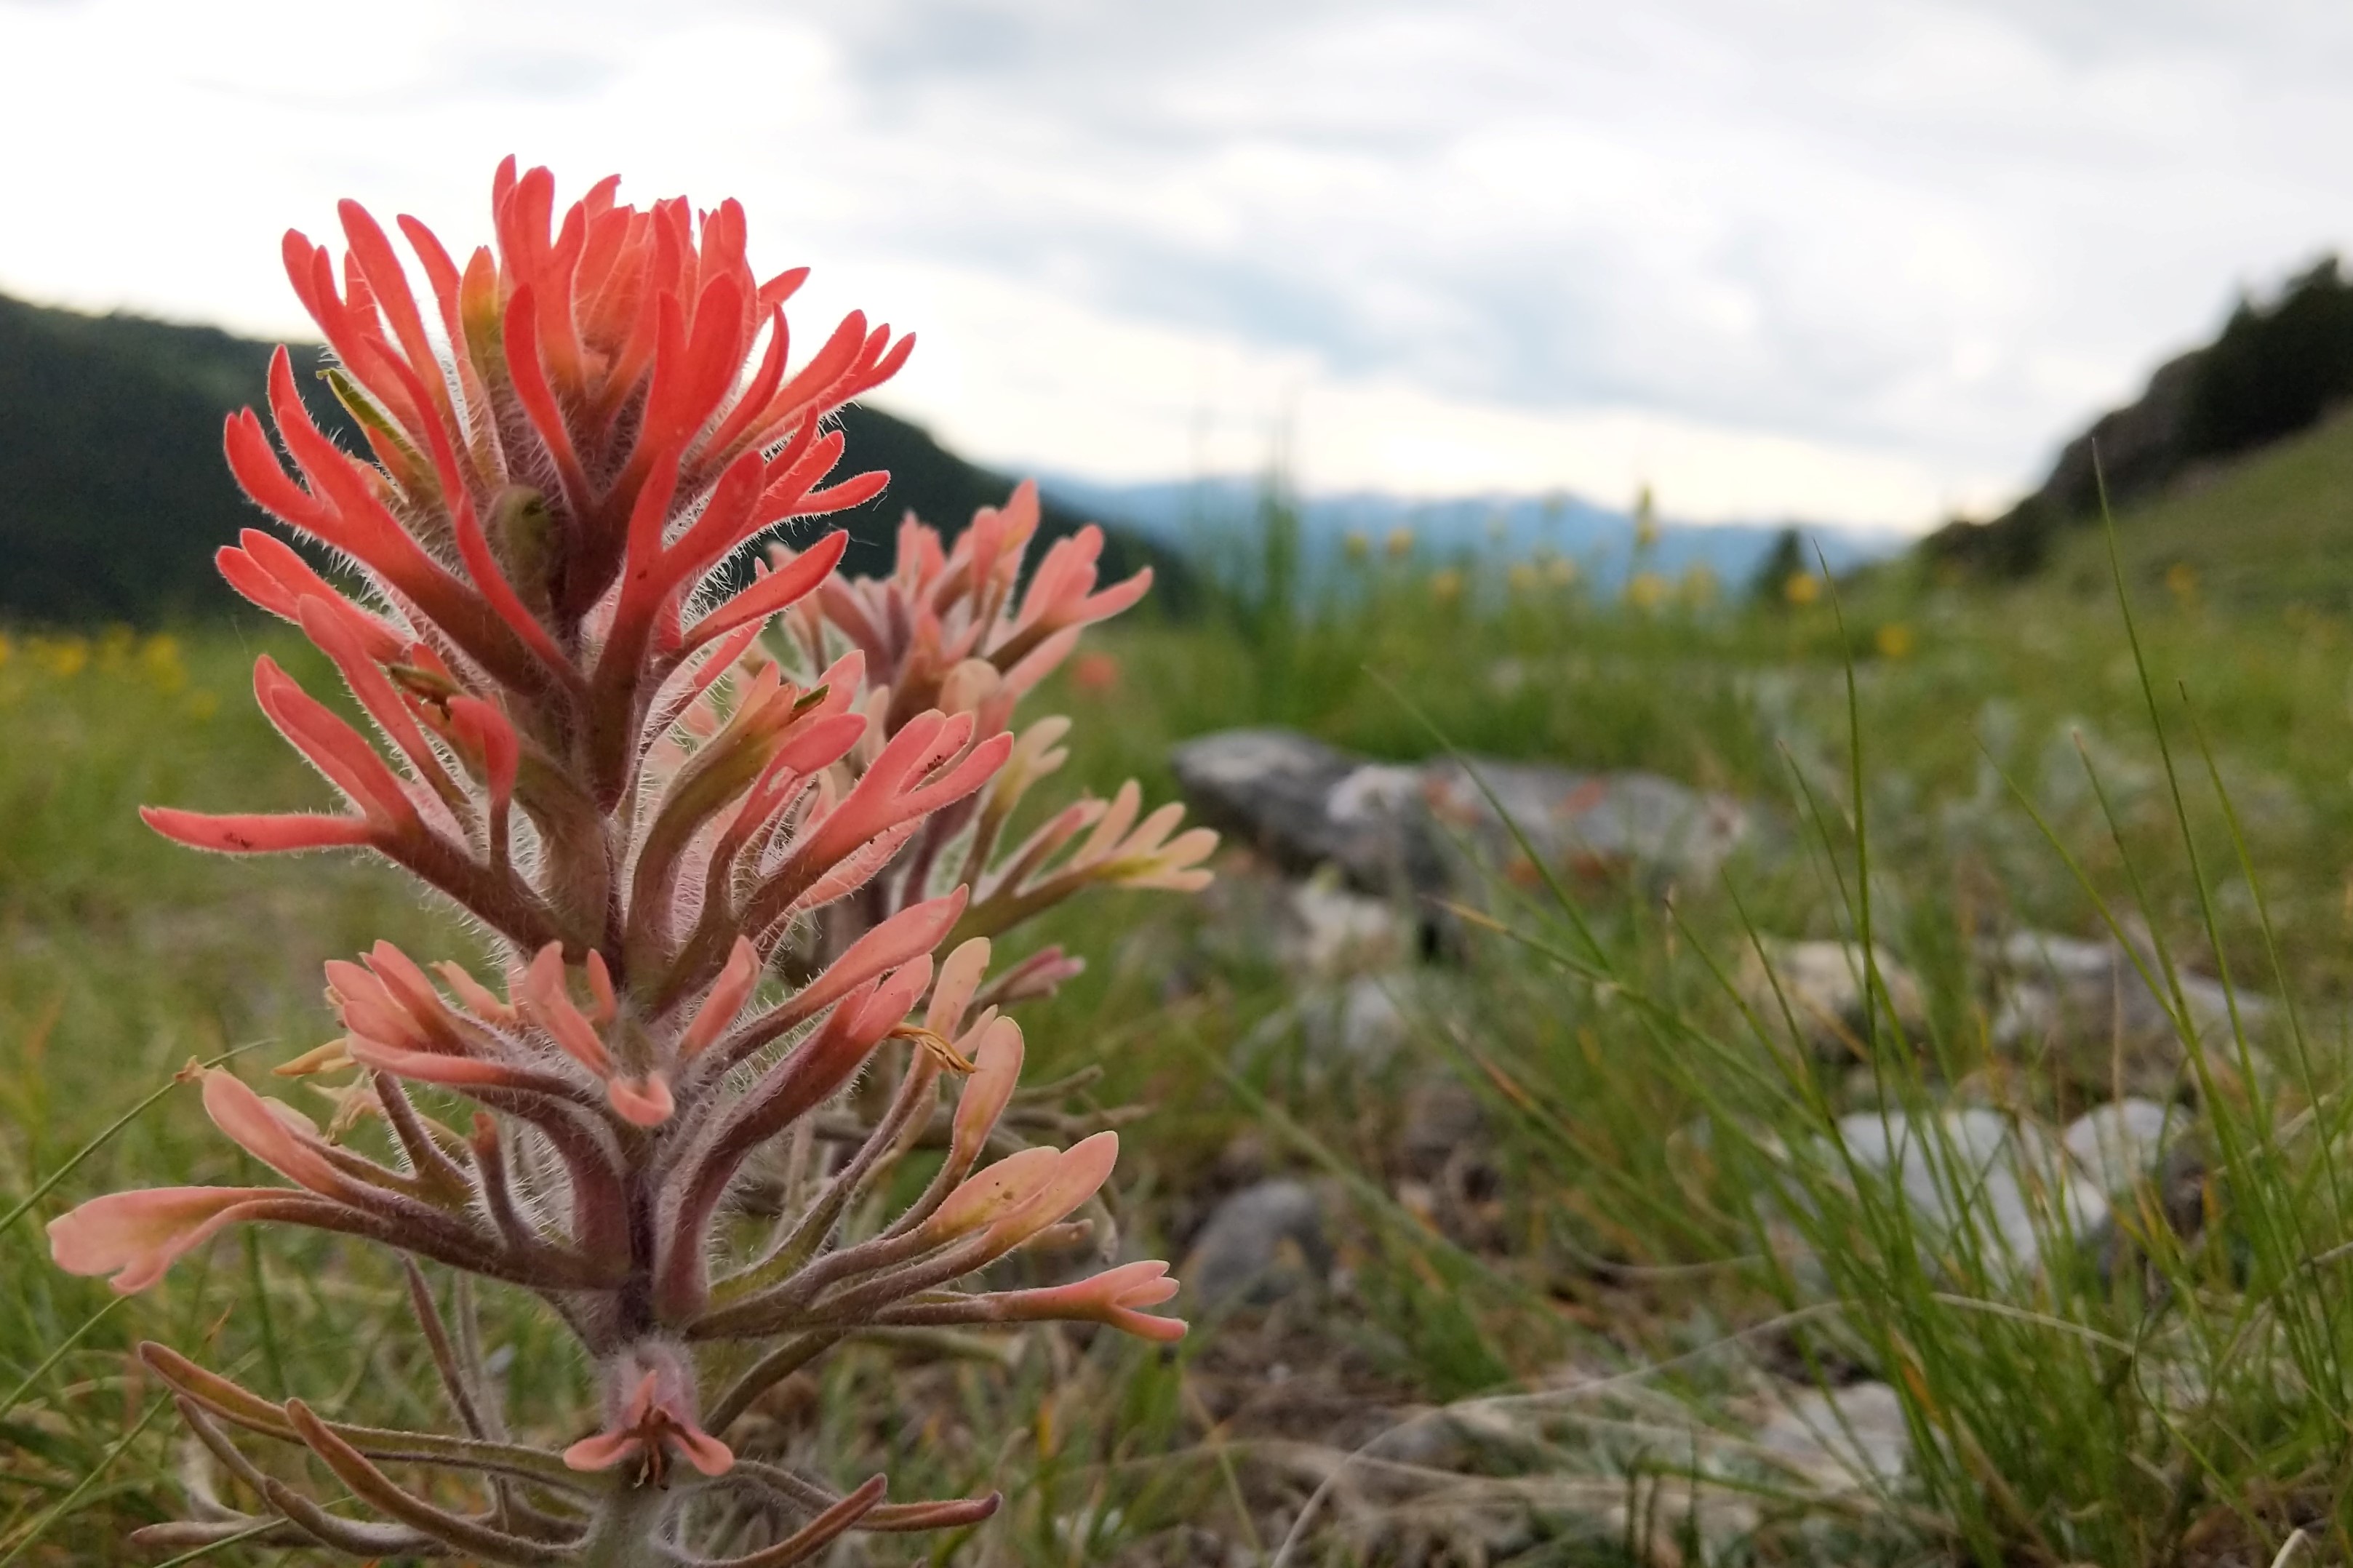 Red flower with tubular petals in the foreground with mountainous terrain behind